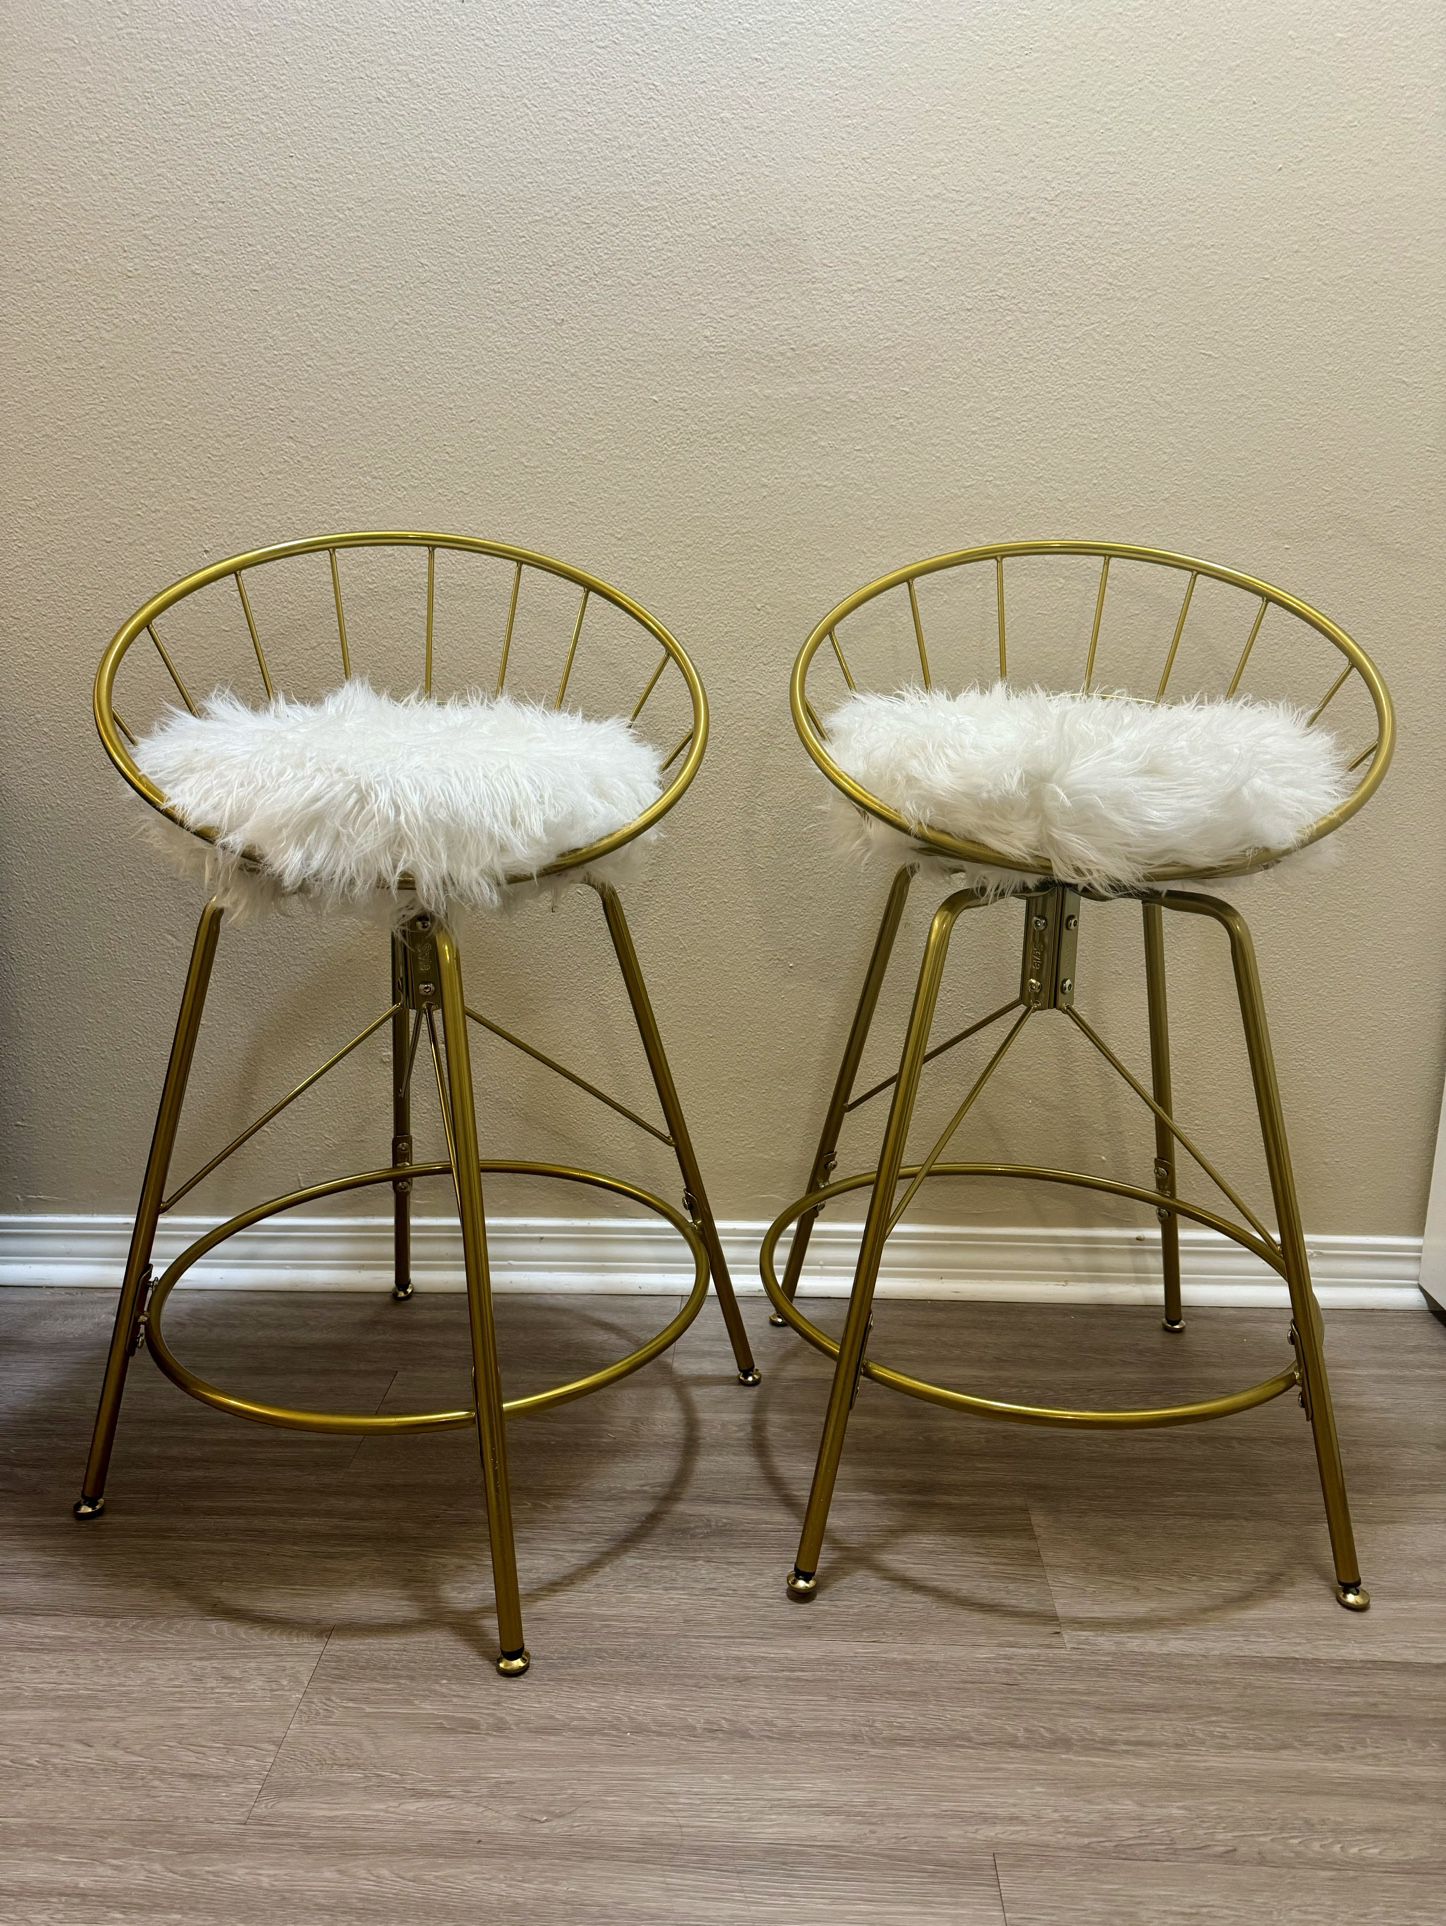 Pair of Golden Barstools with rotating fur seats